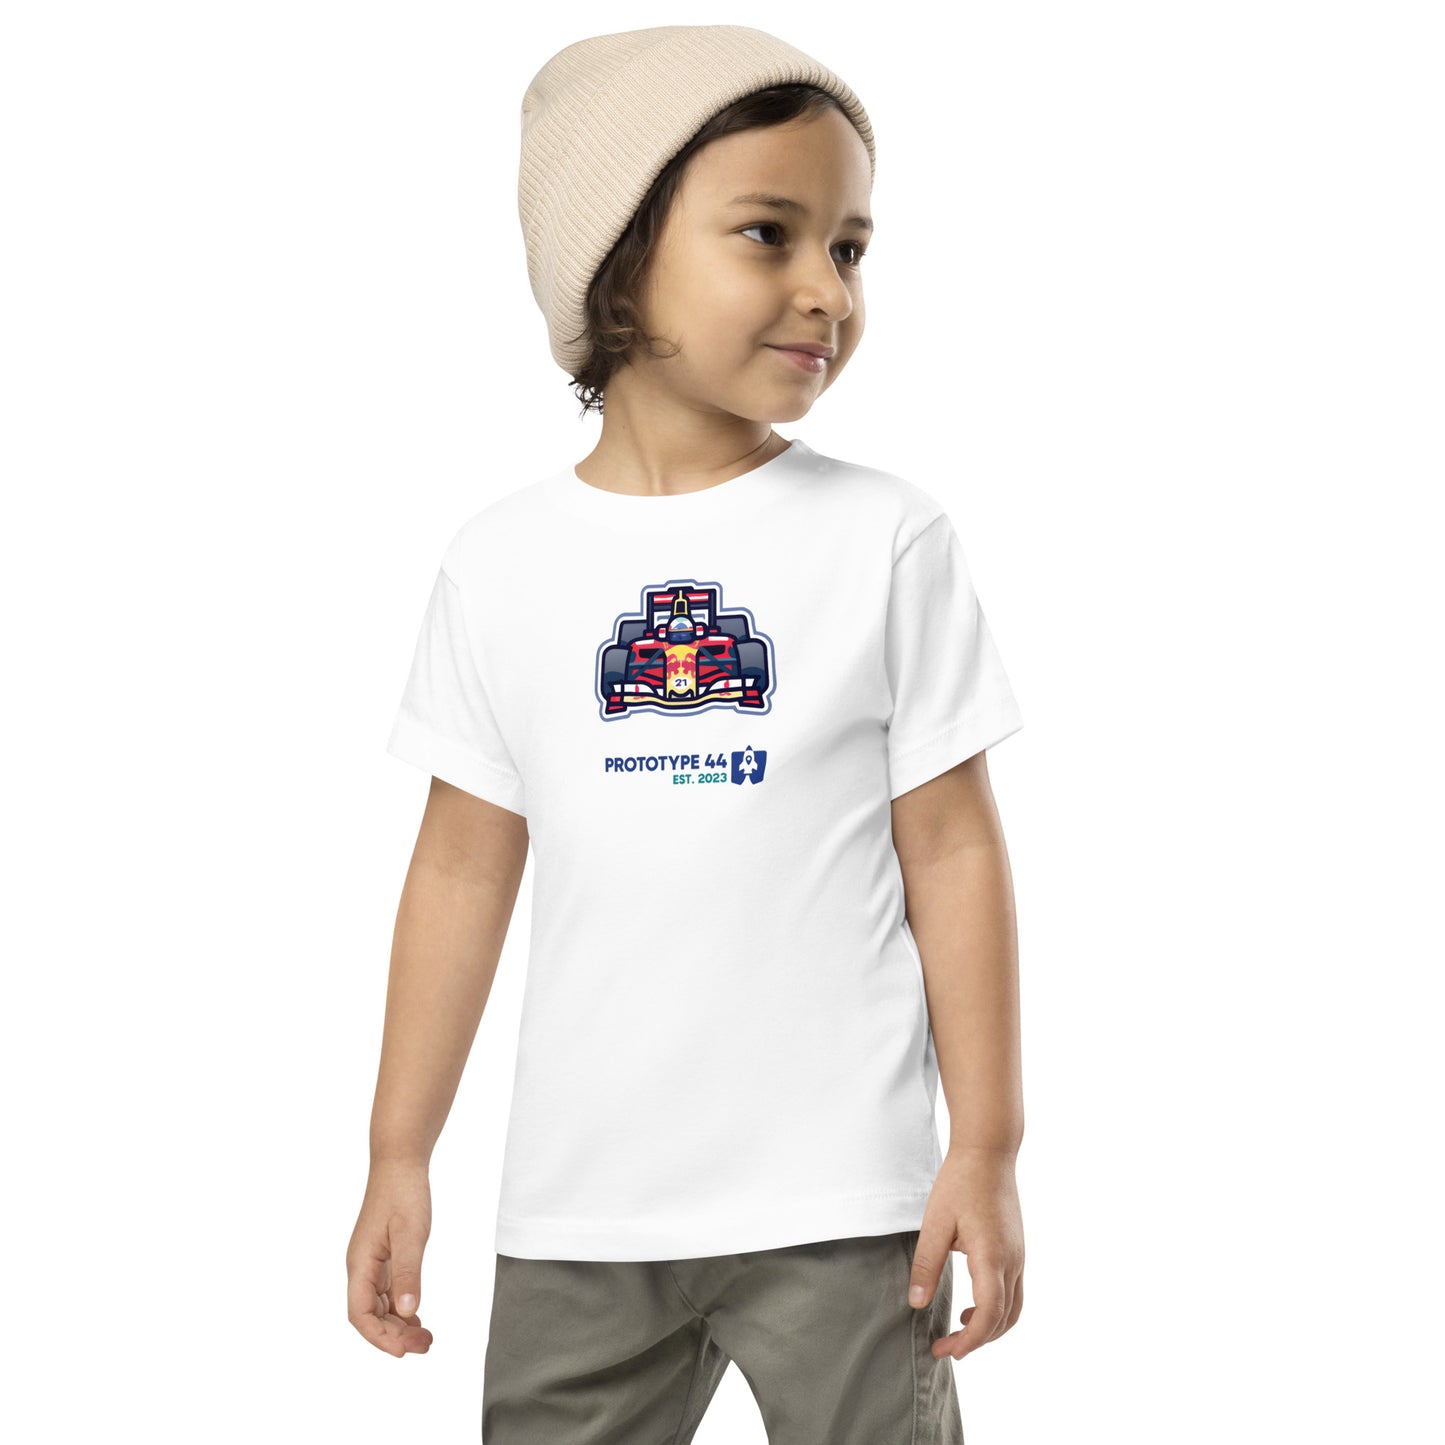 kid wearing t-shirt looking to his left